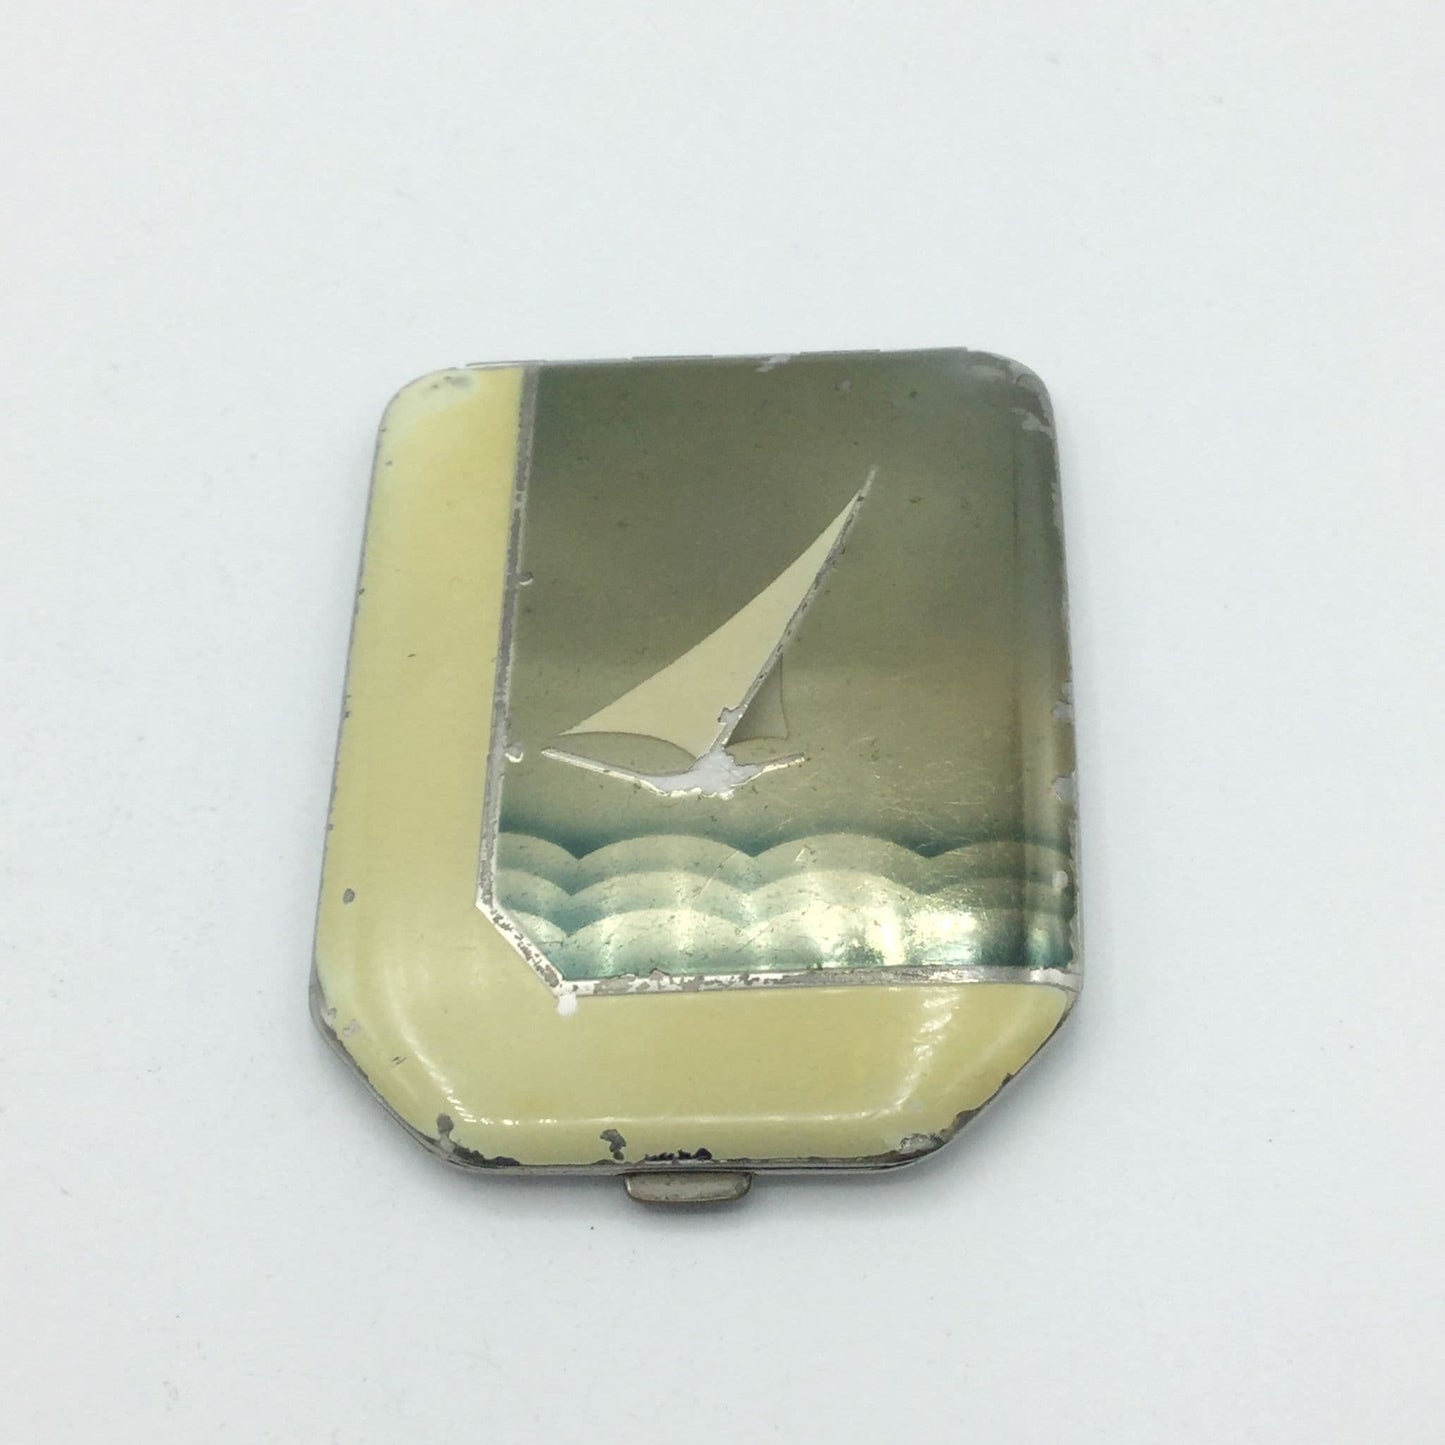 Art Deco 1930s compact showing an enamel of a boat on sea 